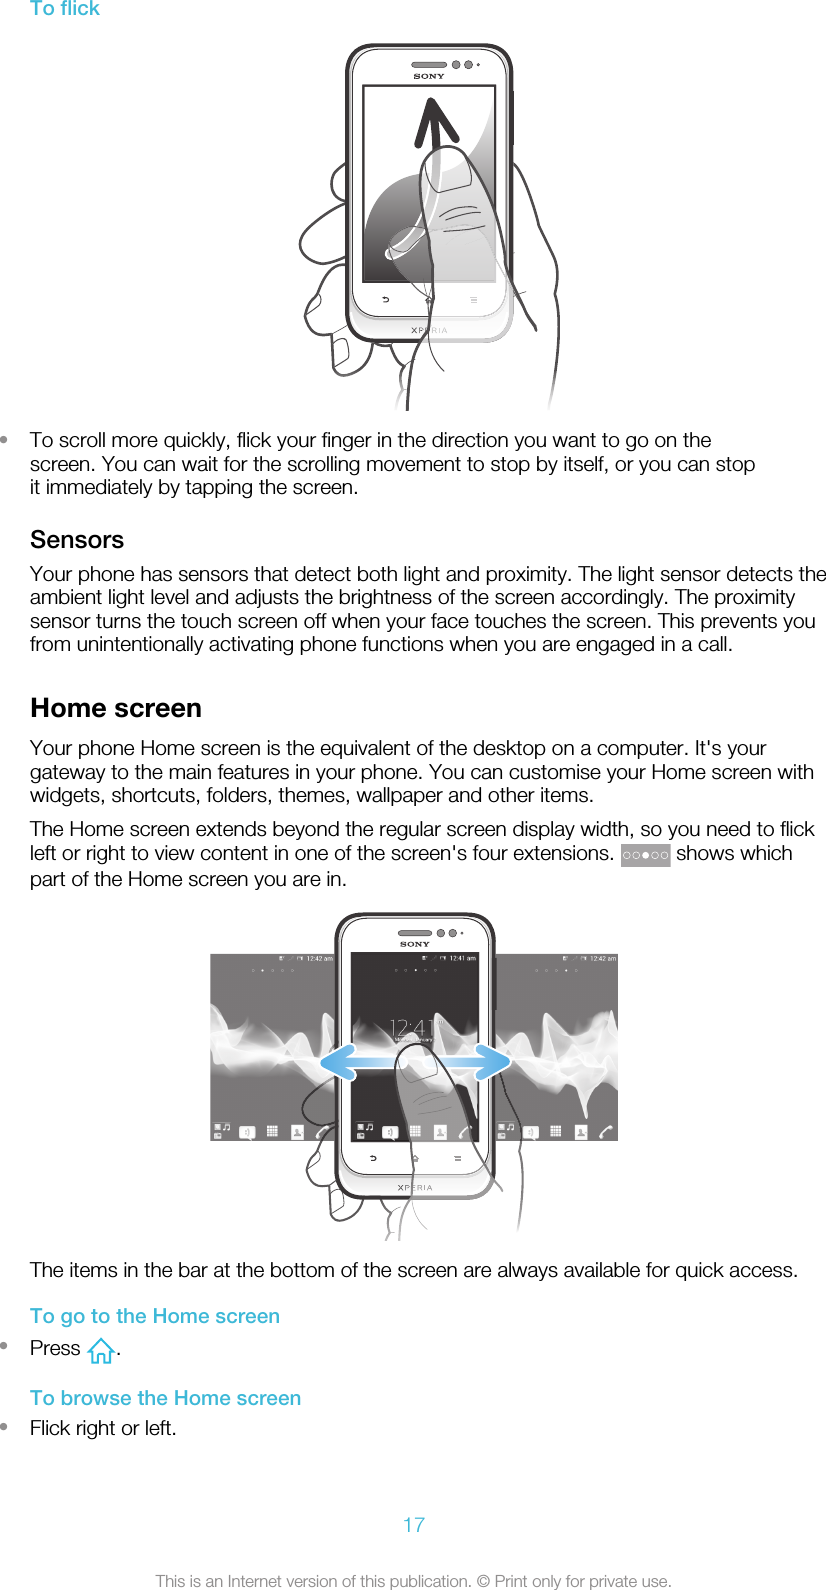 To flick•To scroll more quickly, flick your finger in the direction you want to go on thescreen. You can wait for the scrolling movement to stop by itself, or you can stopit immediately by tapping the screen.SensorsYour phone has sensors that detect both light and proximity. The light sensor detects theambient light level and adjusts the brightness of the screen accordingly. The proximitysensor turns the touch screen off when your face touches the screen. This prevents youfrom unintentionally activating phone functions when you are engaged in a call.Home screenYour phone Home screen is the equivalent of the desktop on a computer. It&apos;s yourgateway to the main features in your phone. You can customise your Home screen withwidgets, shortcuts, folders, themes, wallpaper and other items.The Home screen extends beyond the regular screen display width, so you need to flickleft or right to view content in one of the screen&apos;s four extensions.   shows whichpart of the Home screen you are in.The items in the bar at the bottom of the screen are always available for quick access.To go to the Home screen•Press  .To browse the Home screen•Flick right or left.17This is an Internet version of this publication. © Print only for private use.